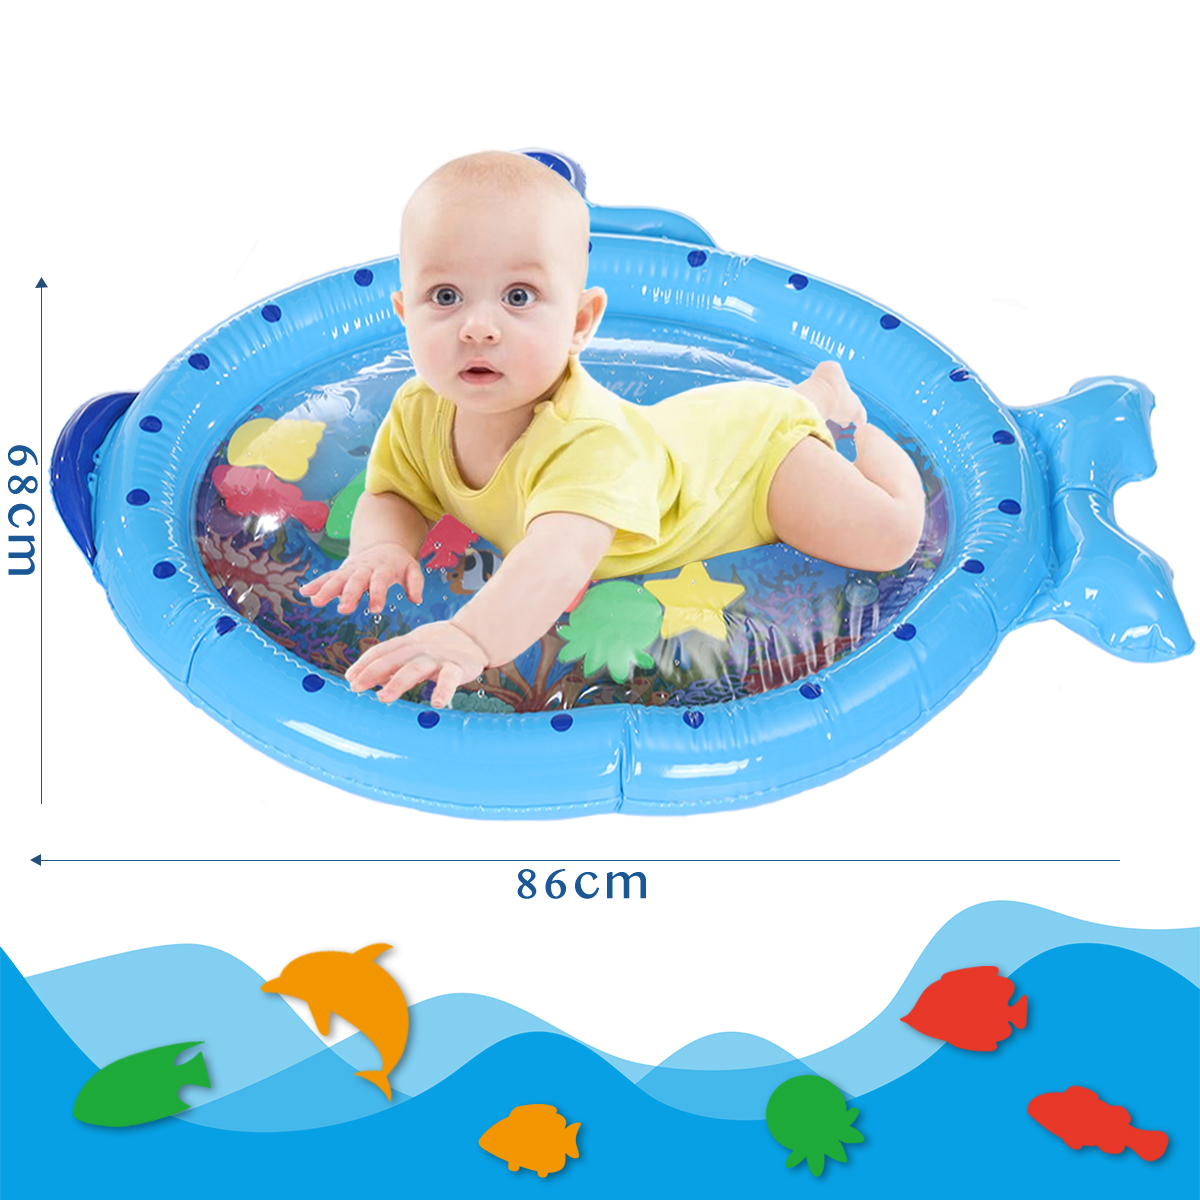 Blue-Sprinkler-Play-Mat-With-Cartoon-Submarine-Pattern-For-Kids-Filling-Fun-Water-Cushion-Baby-Toys--1895673-10